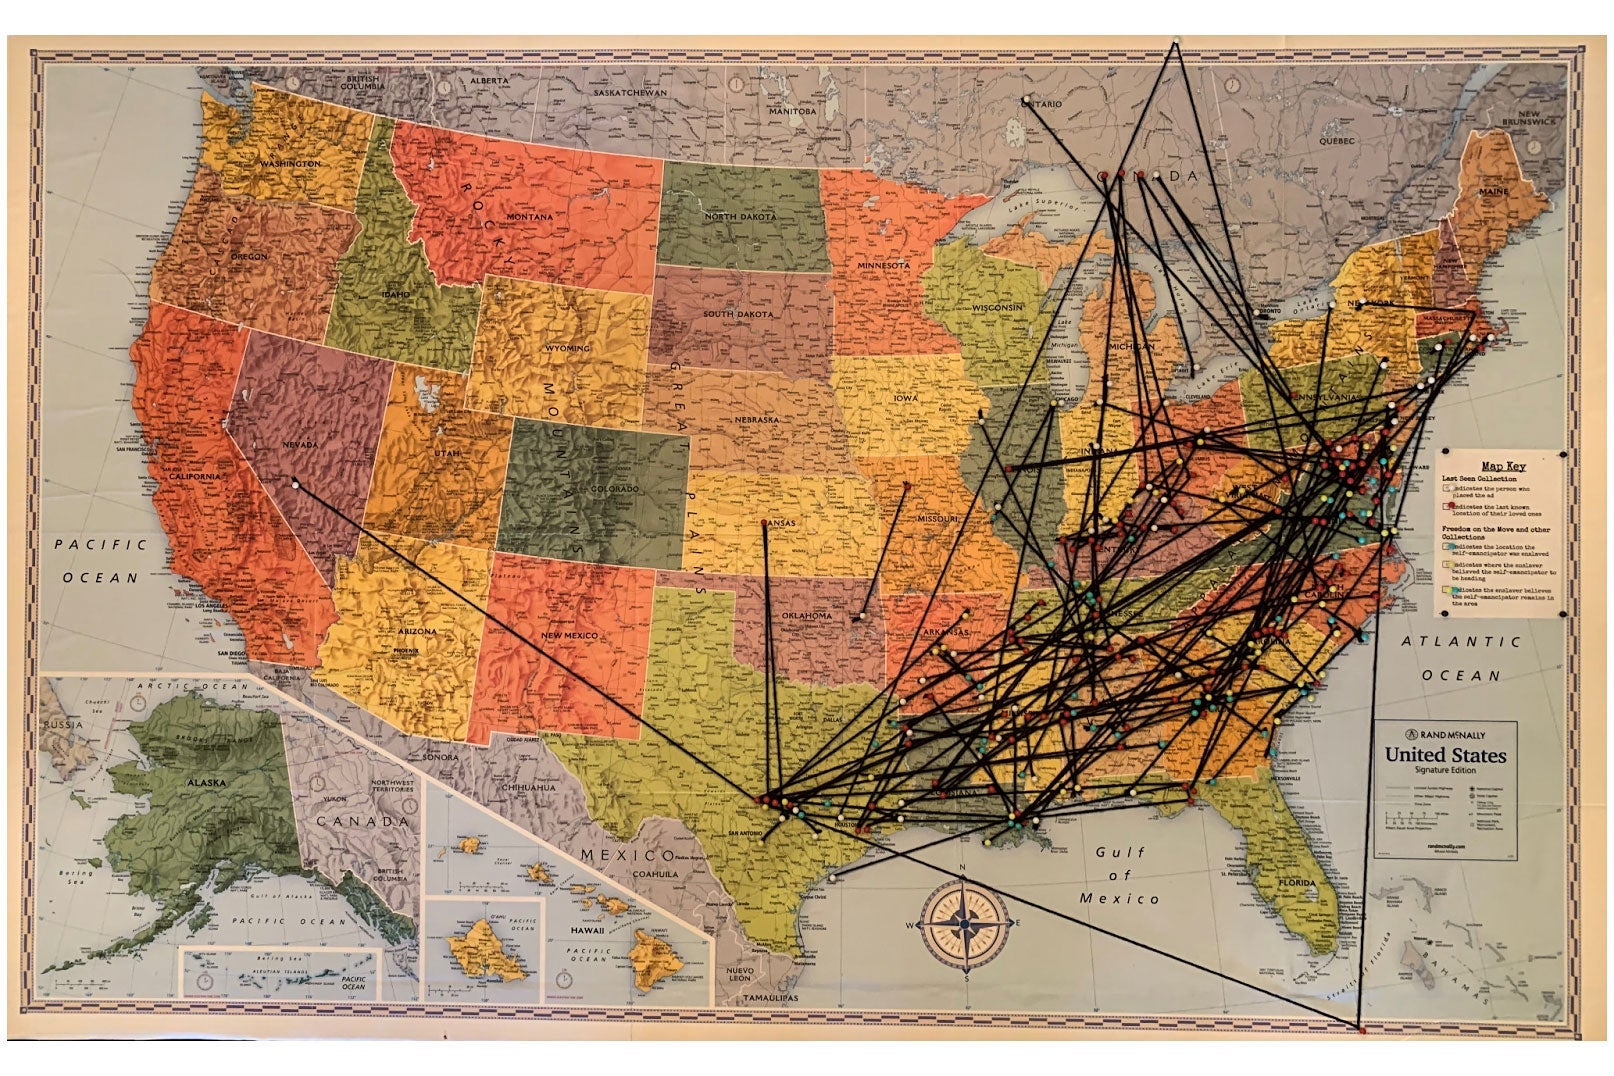 A classroom map of the U.S. with lines of black string all over it showing the paths of enslaved people to freedom